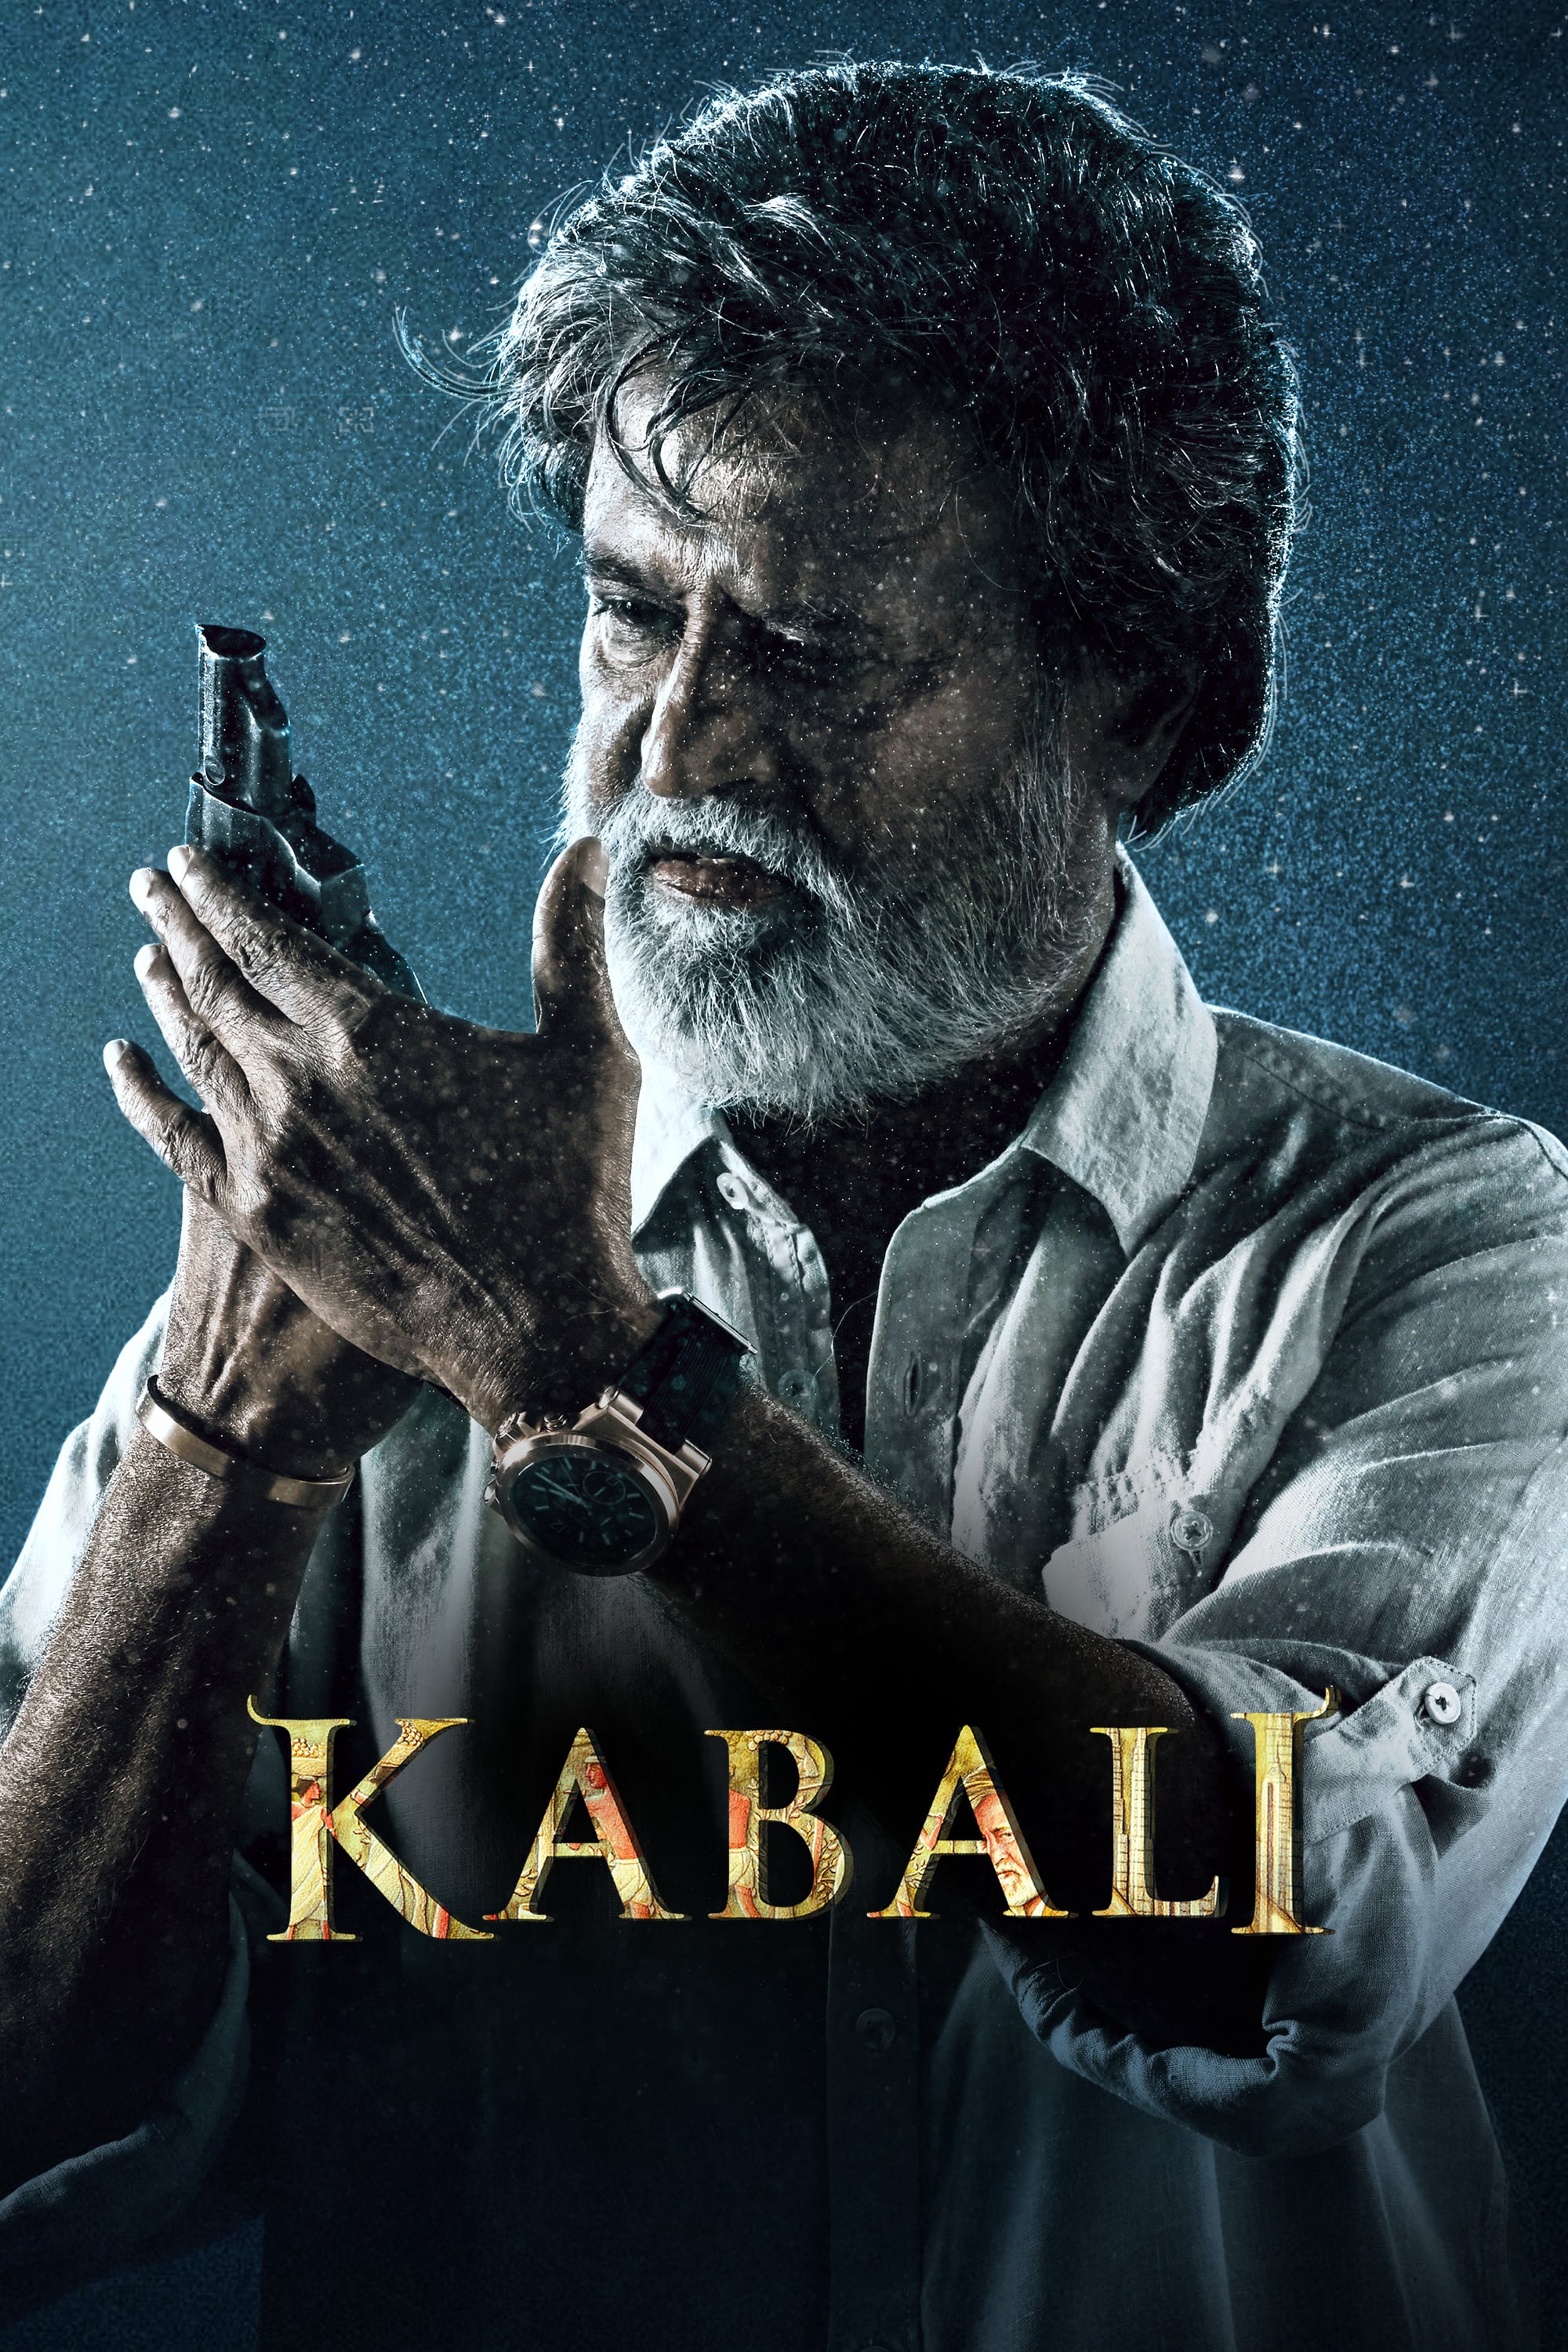 Kabali (2016) Movie. Where To Watch Streaming Online